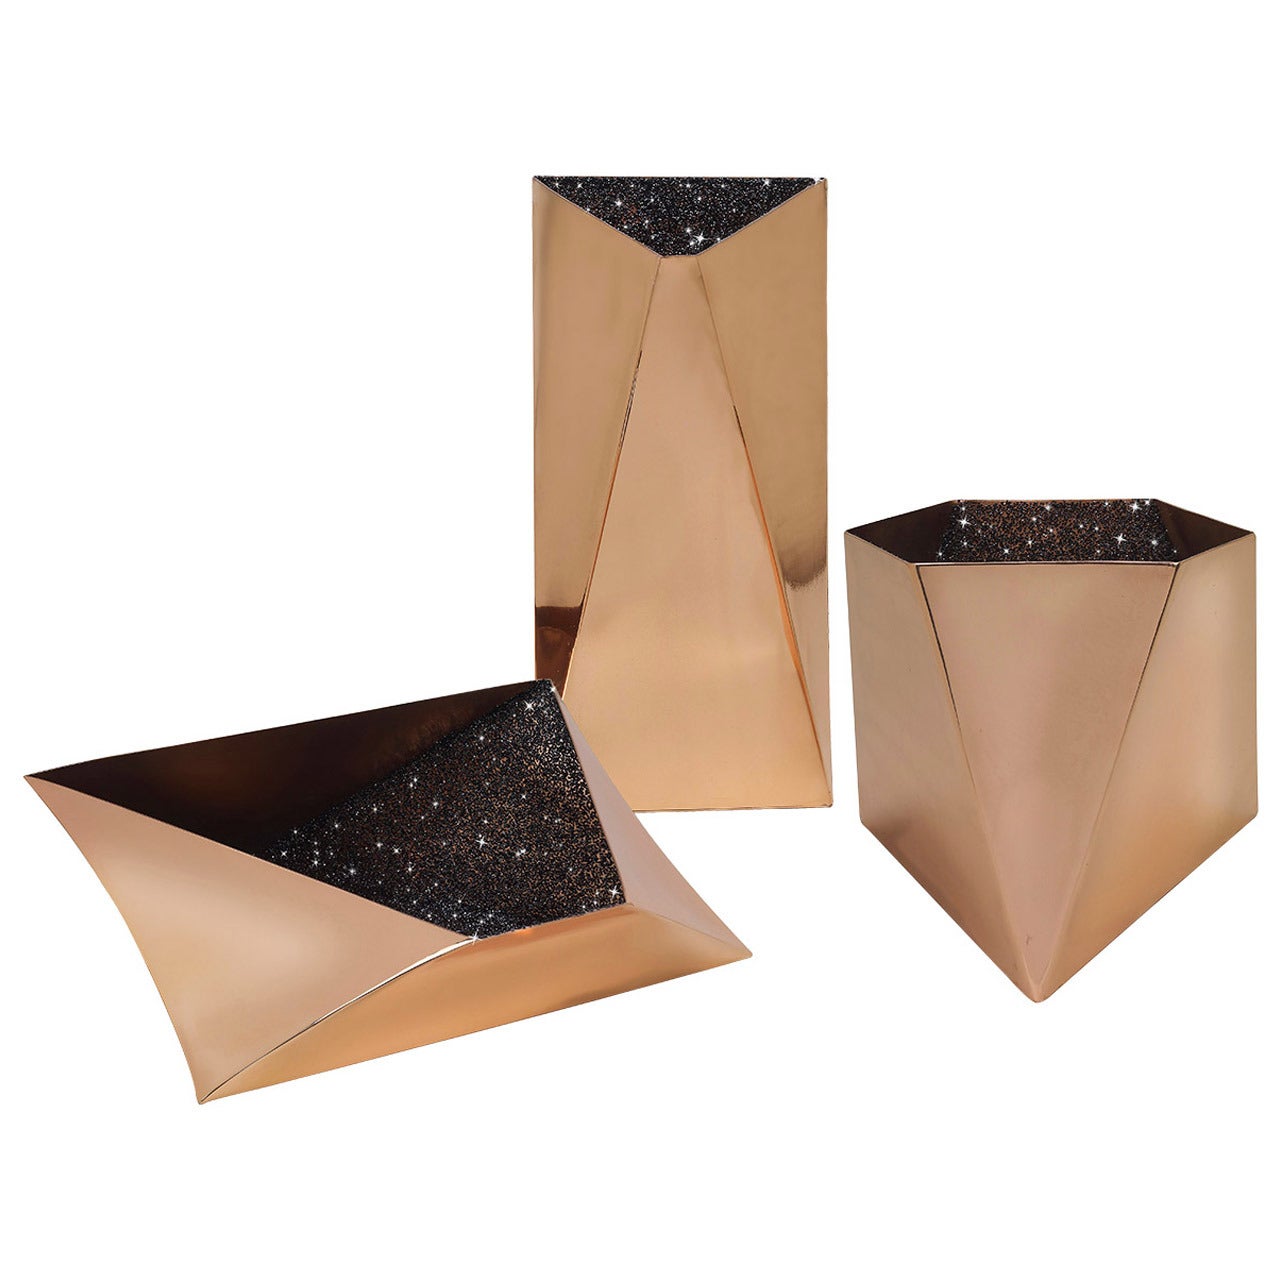 The Collective 'Star' Set of Three Vessels or Vases by David Adjaye